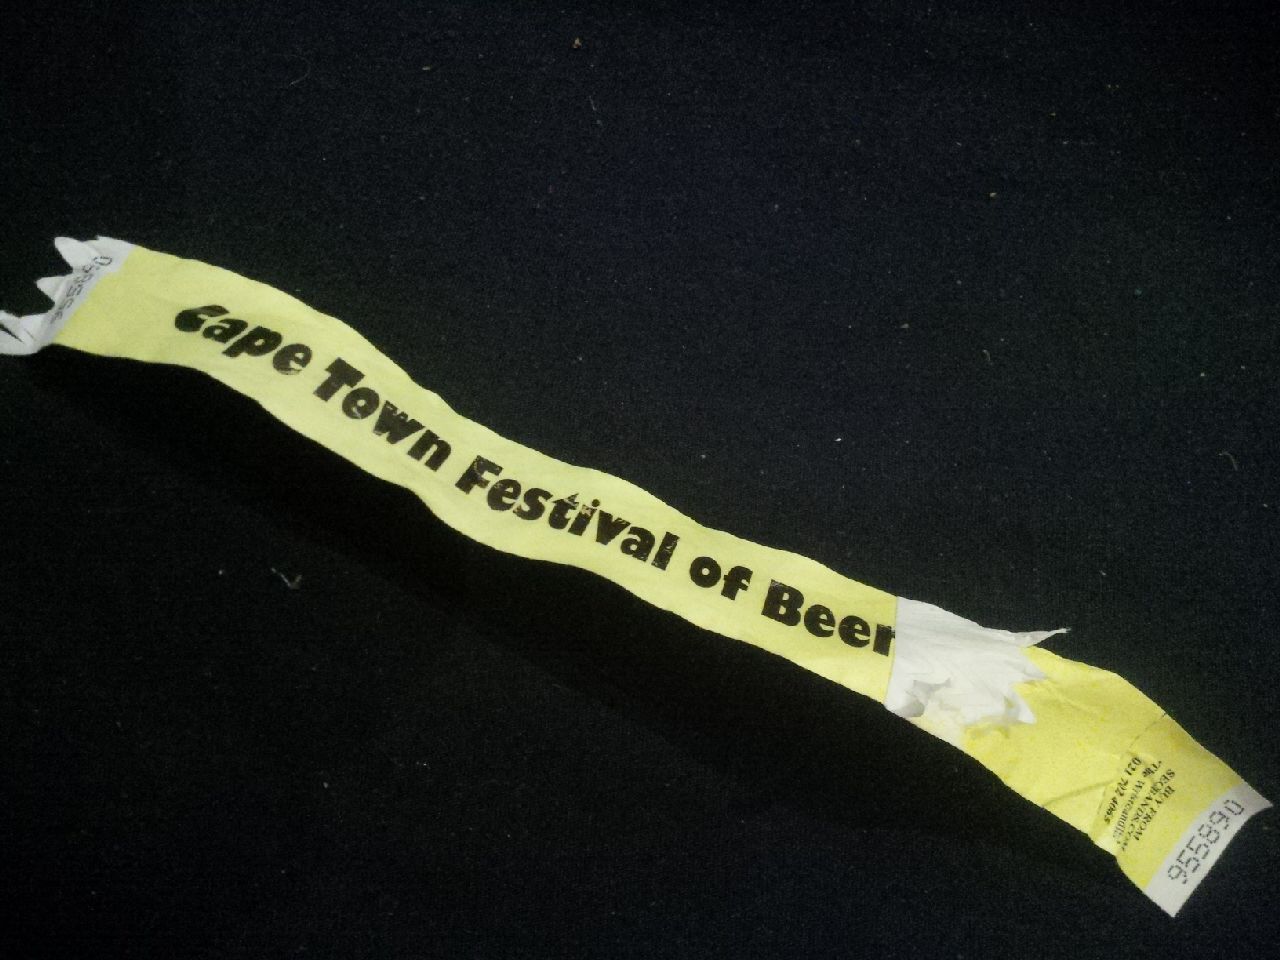 CTFOB 2014 - the end. An awesome event, congrats to the organisers. See you again next year!